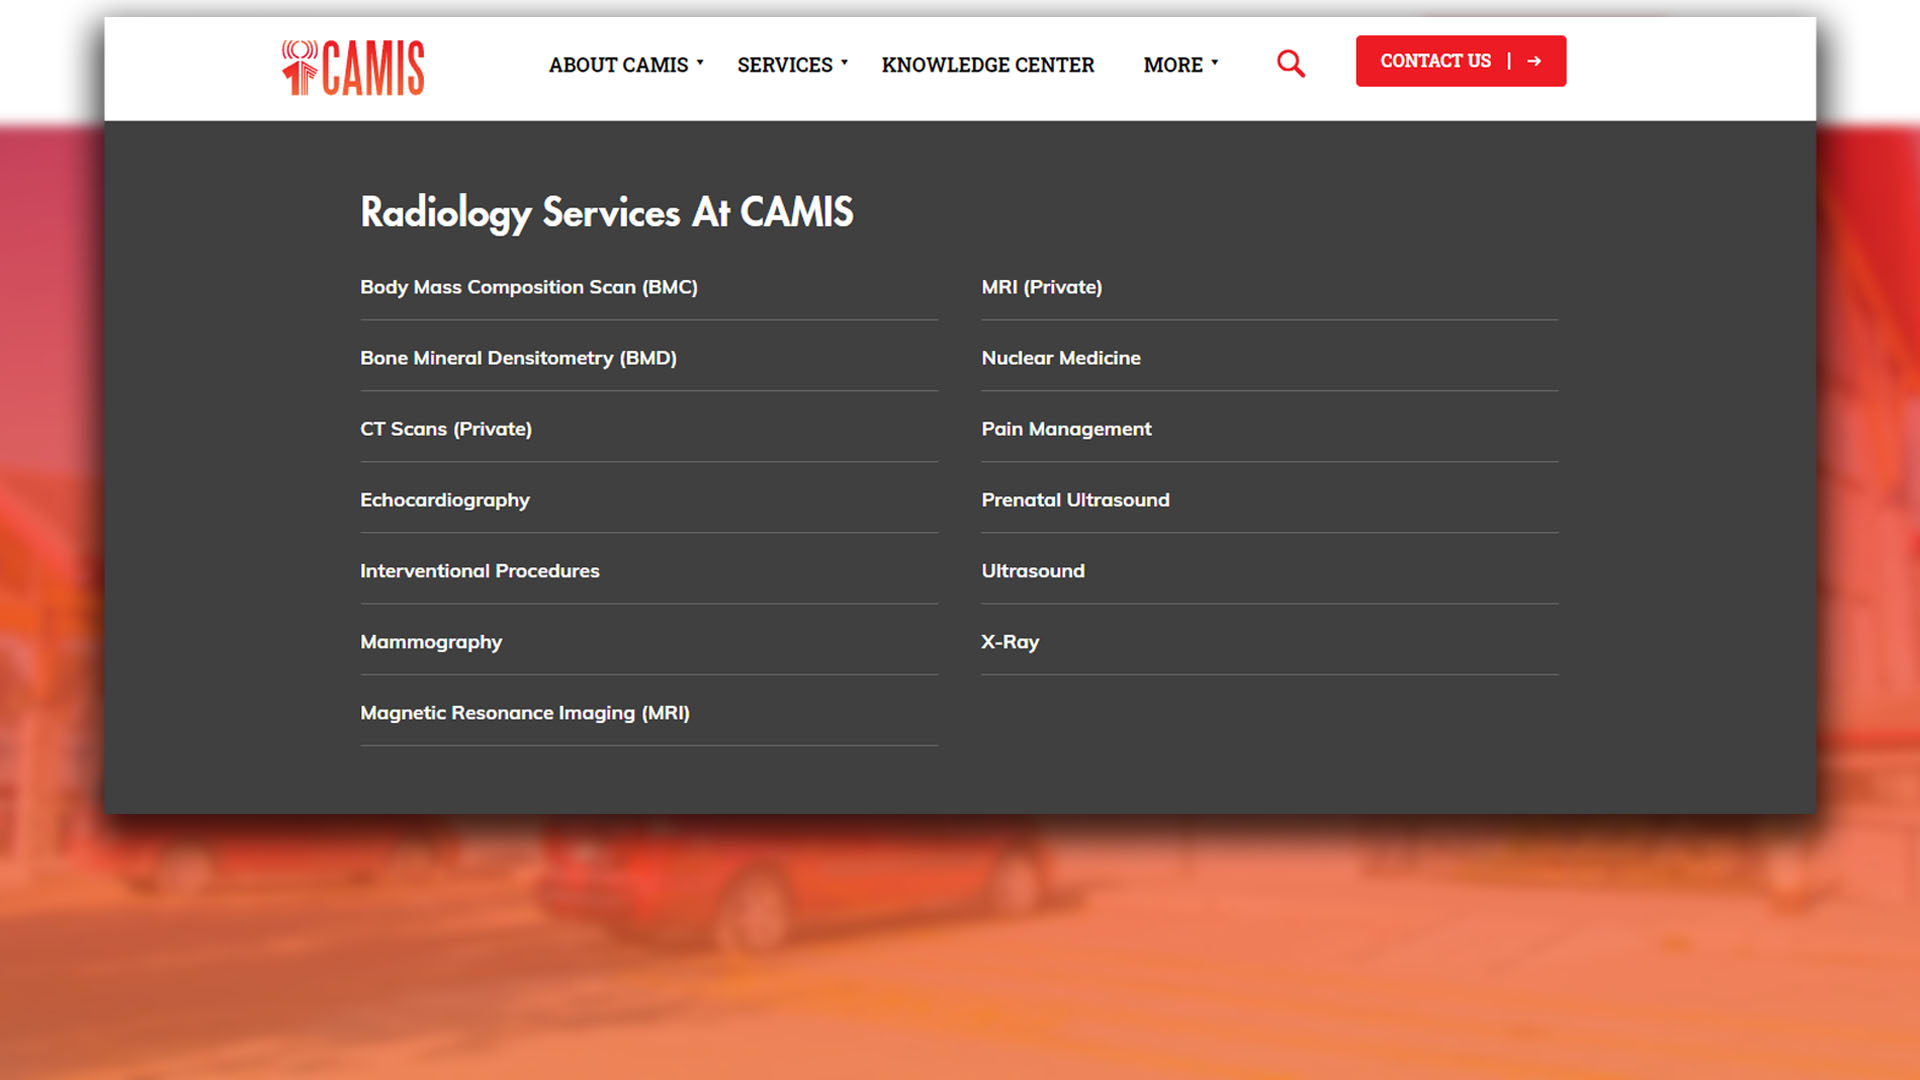 A webpage header for 'CAMIS' with a navigation bar including 'ABOUT CAMIS', 'SERVICES', 'KNOWLEDGE CENTER', 'MORE', and a 'CONTACT US' button. The background is blurred, focusing attention on the clear, organized service offerings.